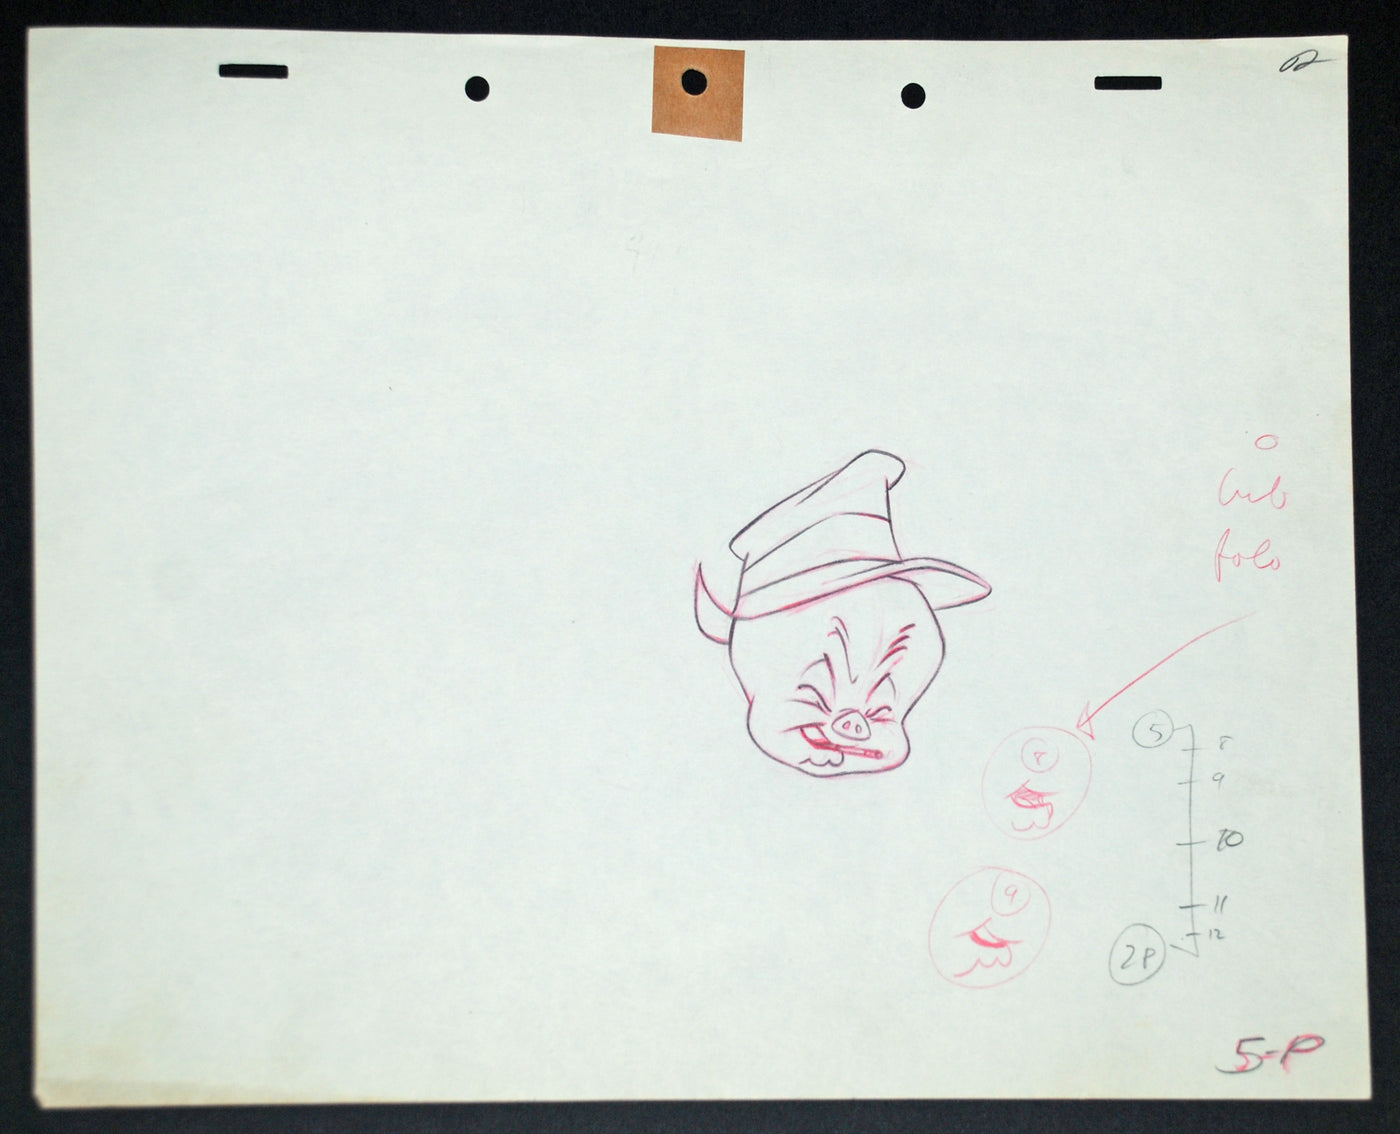 Original Warner Brothers Production Drawing Featuring Porky Pig